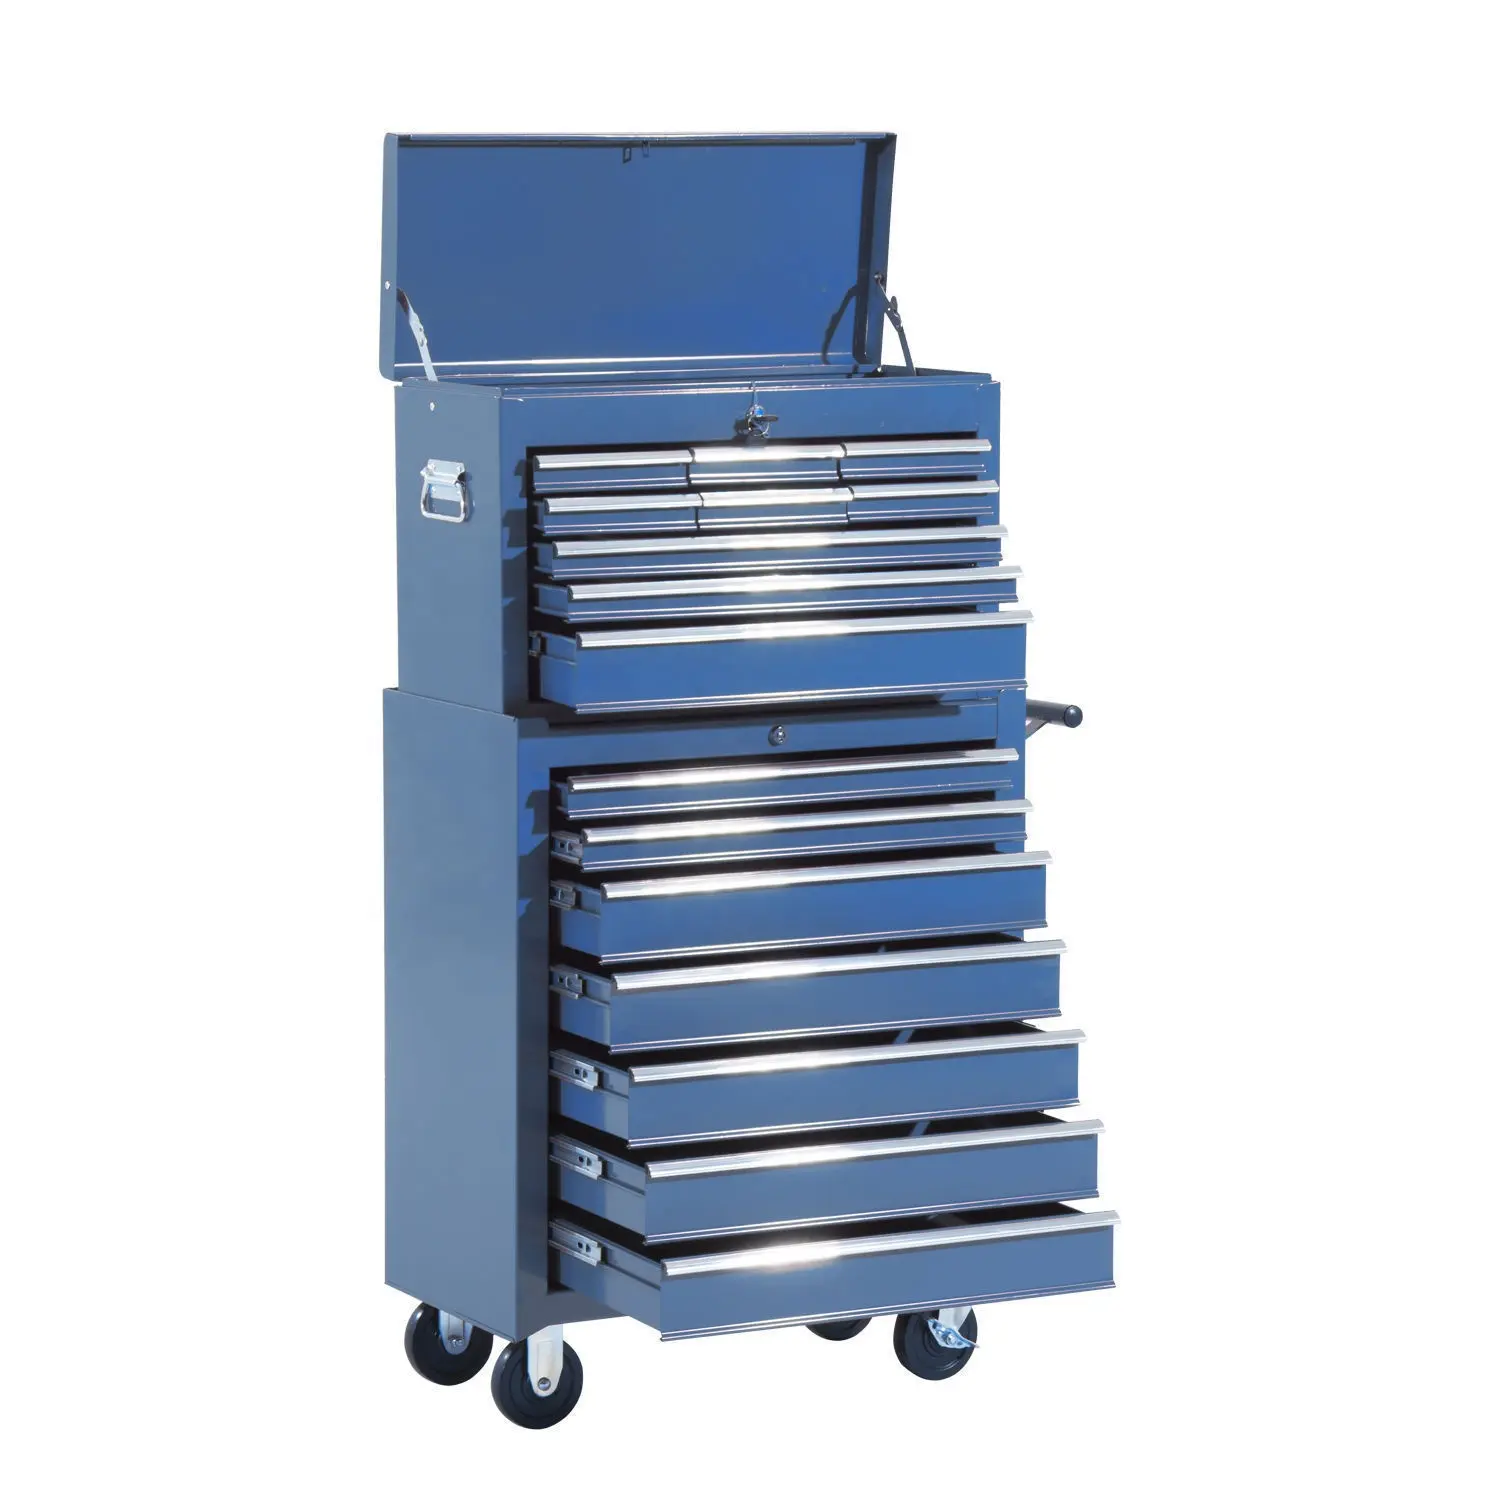 Wholesales 2021 Hot sales metal professional movable toolbox roller tool cabinet chest hand cart